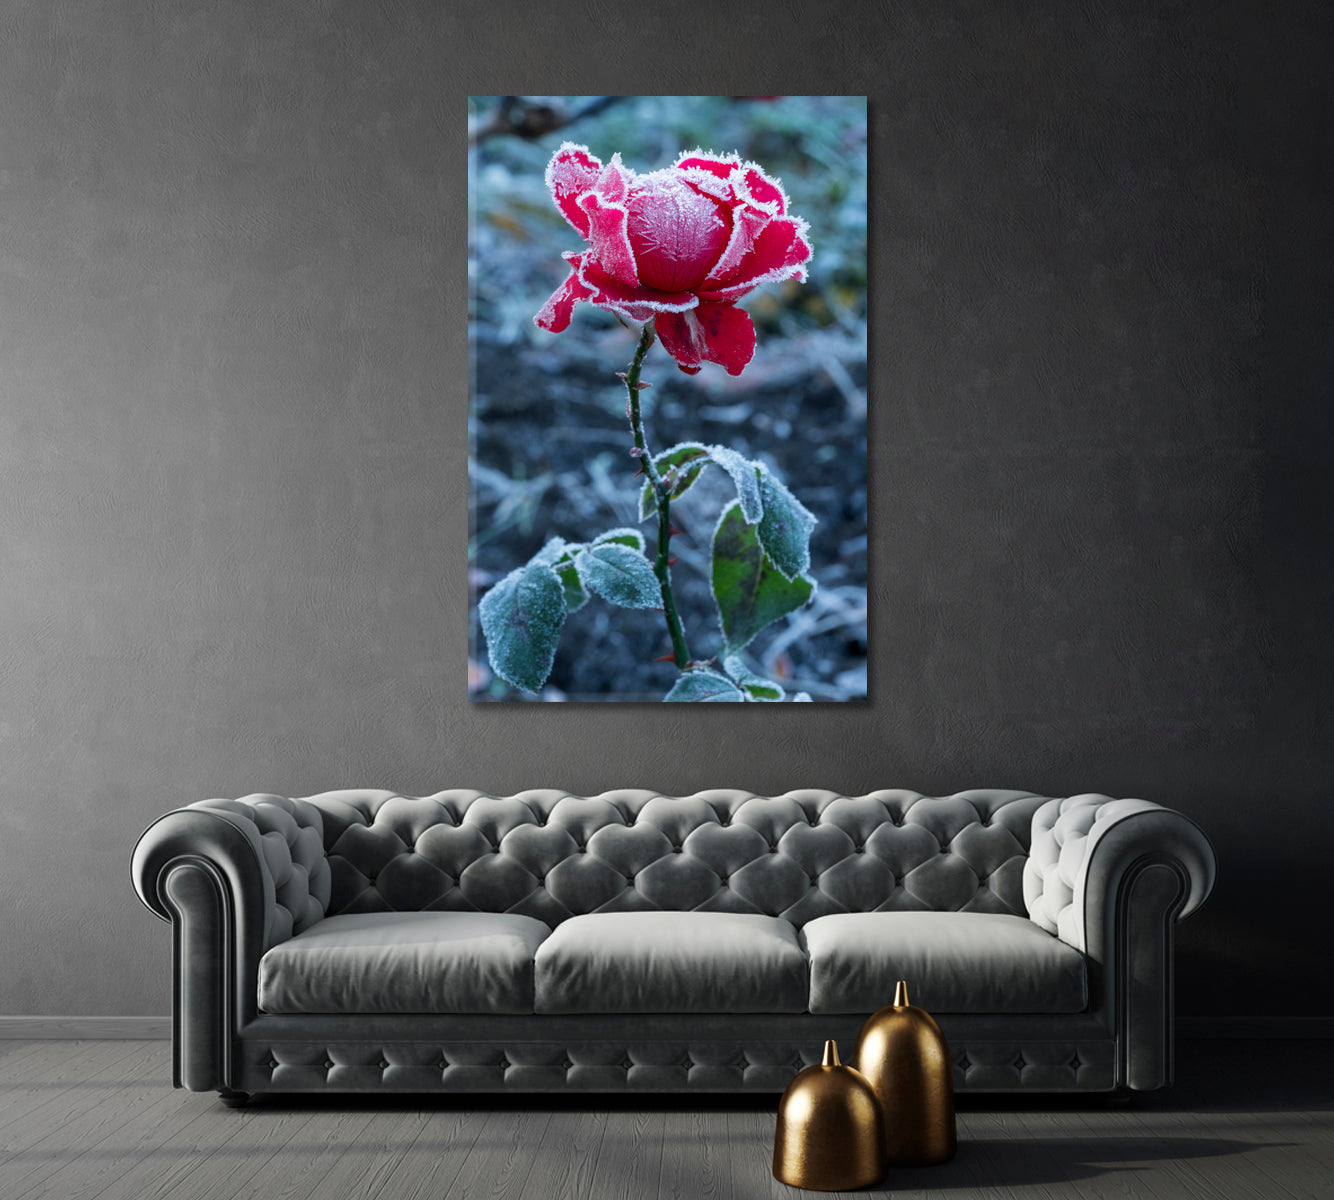 Frosty Red Rose Canvas Print-Canvas Print-CetArt-1 panel-16x24 inches-CetArt